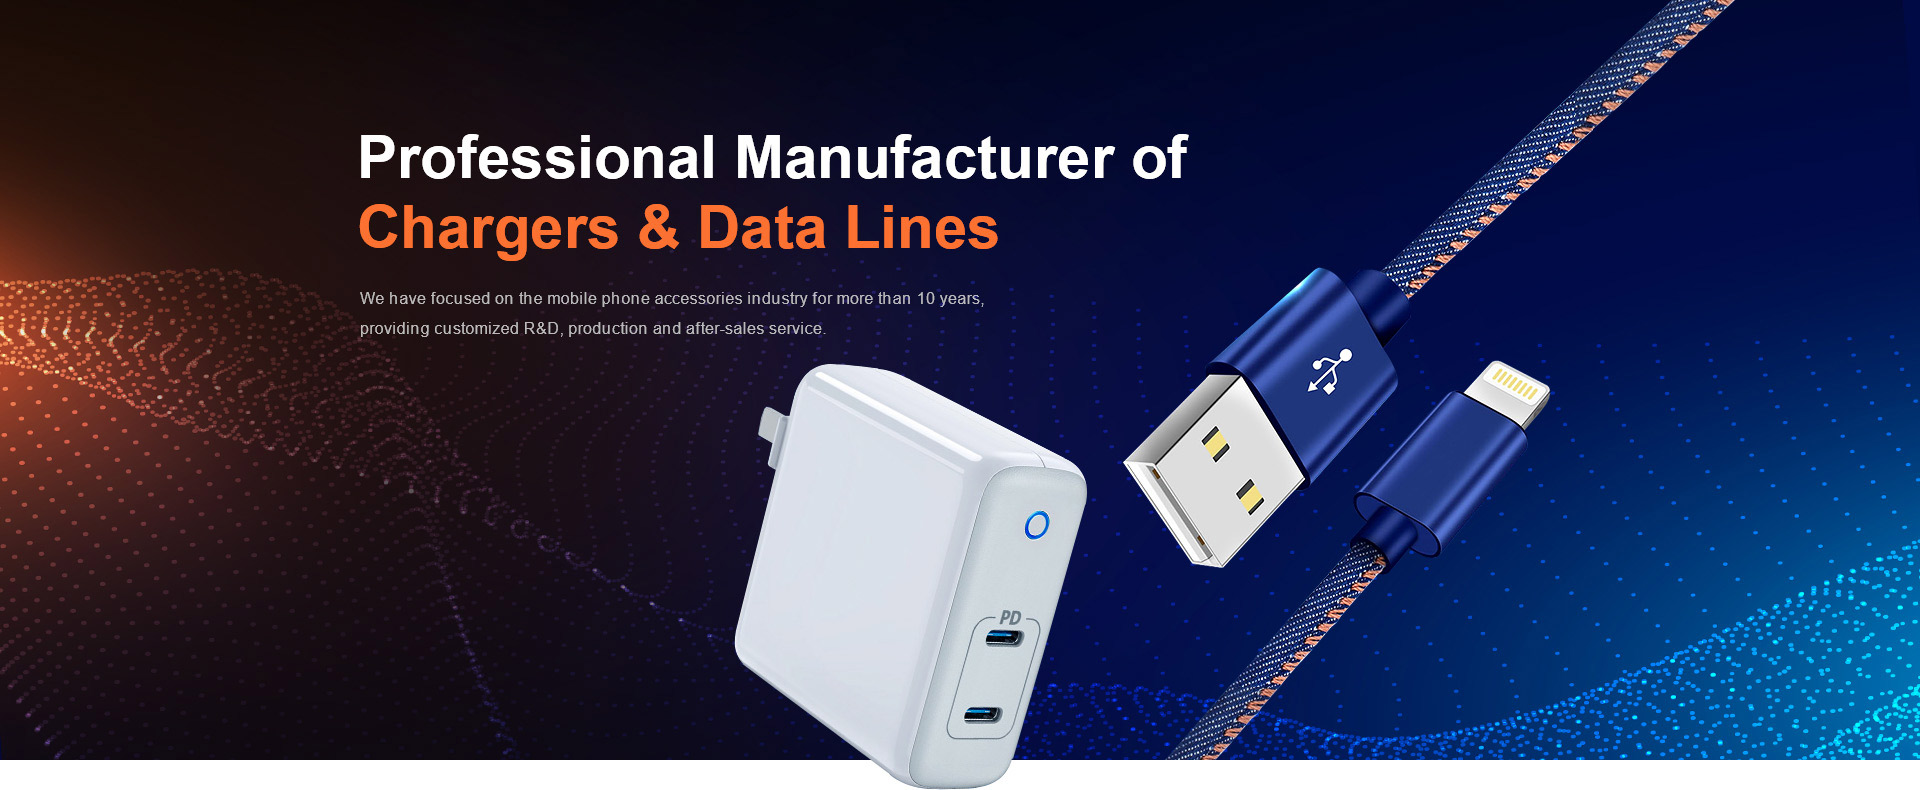 Professional Manufacturer of Chargers & Data Lines